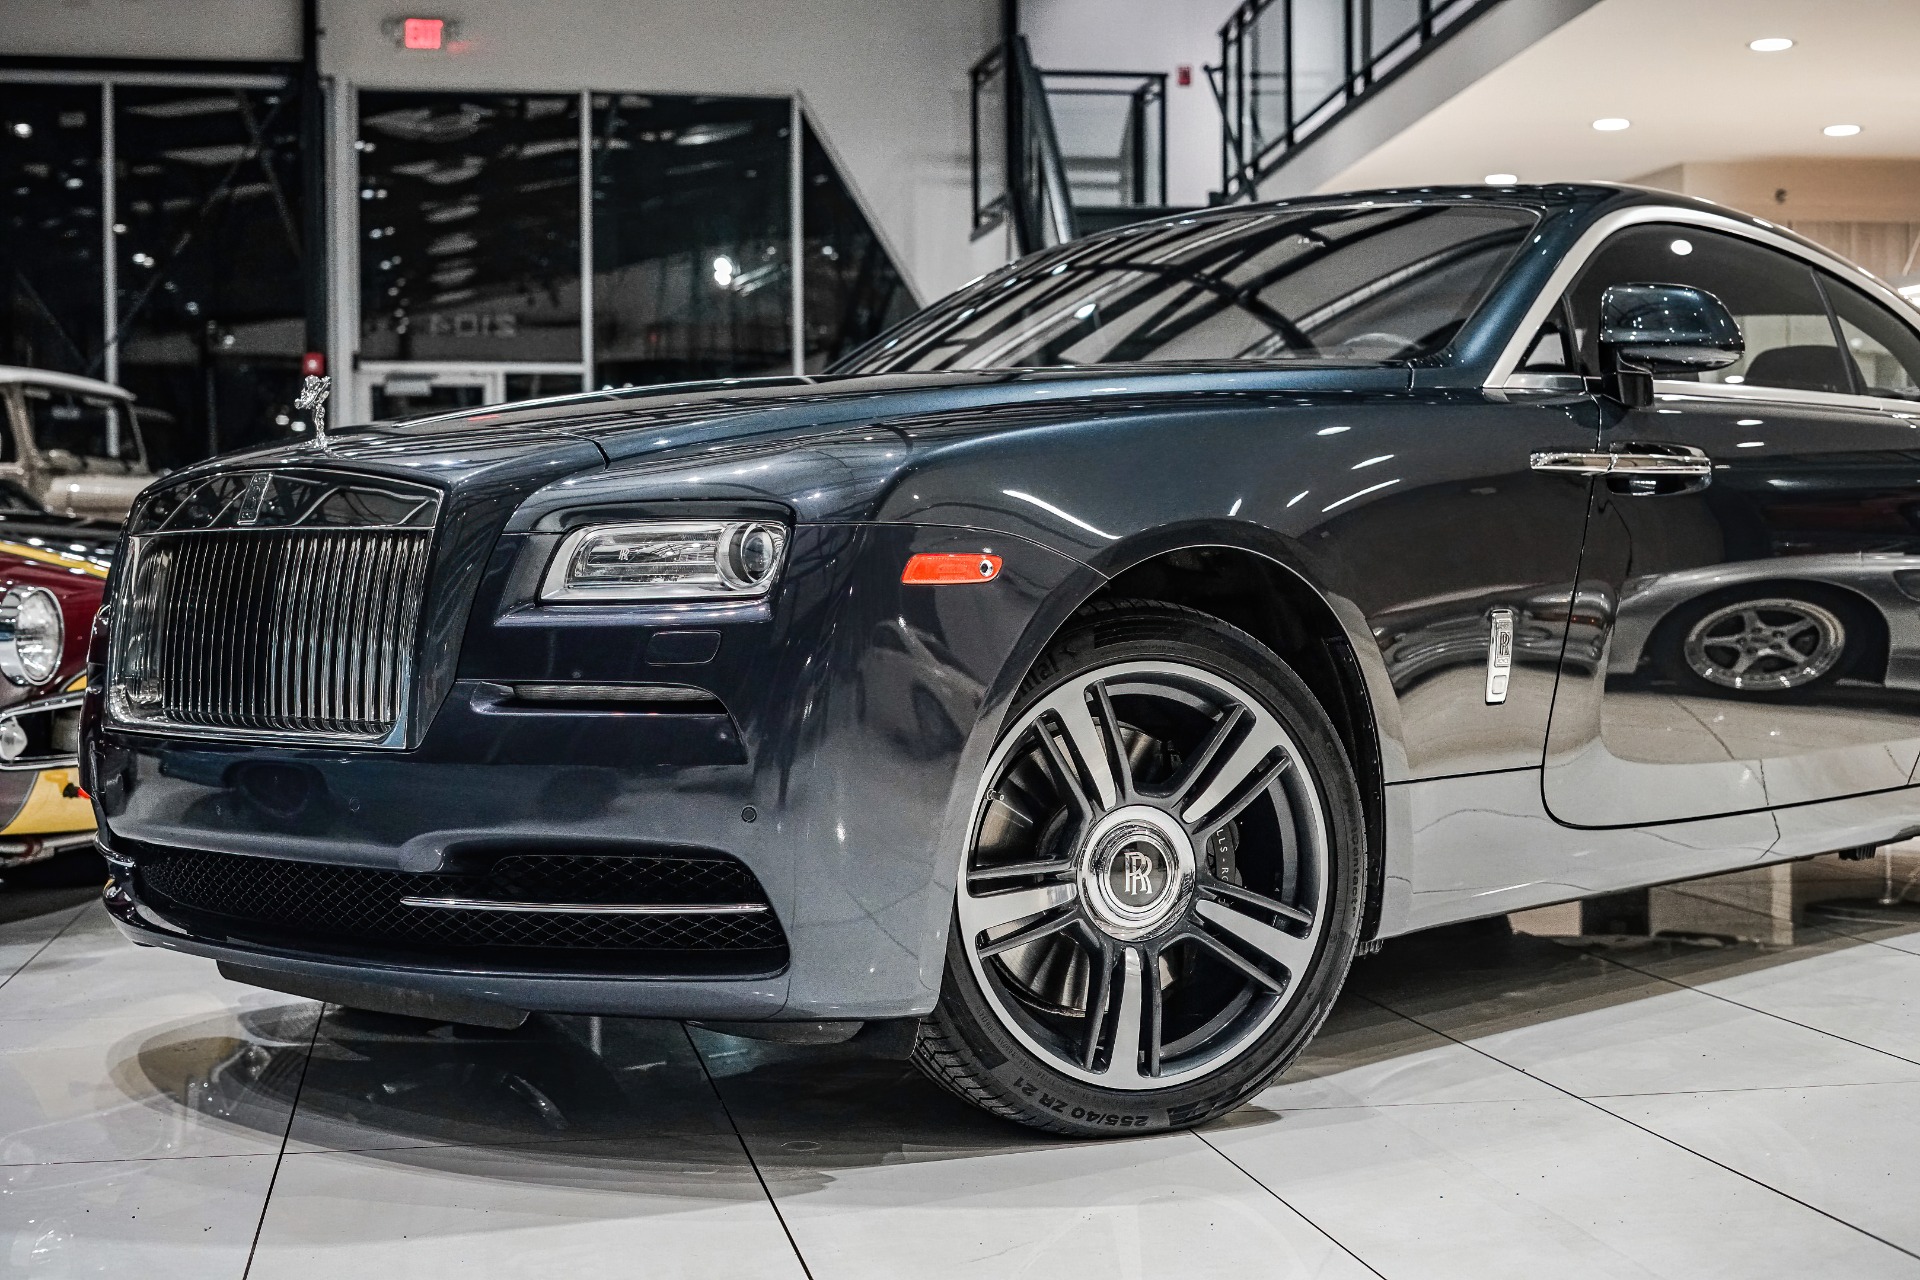 Used 2016 Rolls-Royce Wraith DRIVERS ASSISTANCE PKG! HEADS UP DISPLAY! ONLY  14K MILES! For Sale ($209